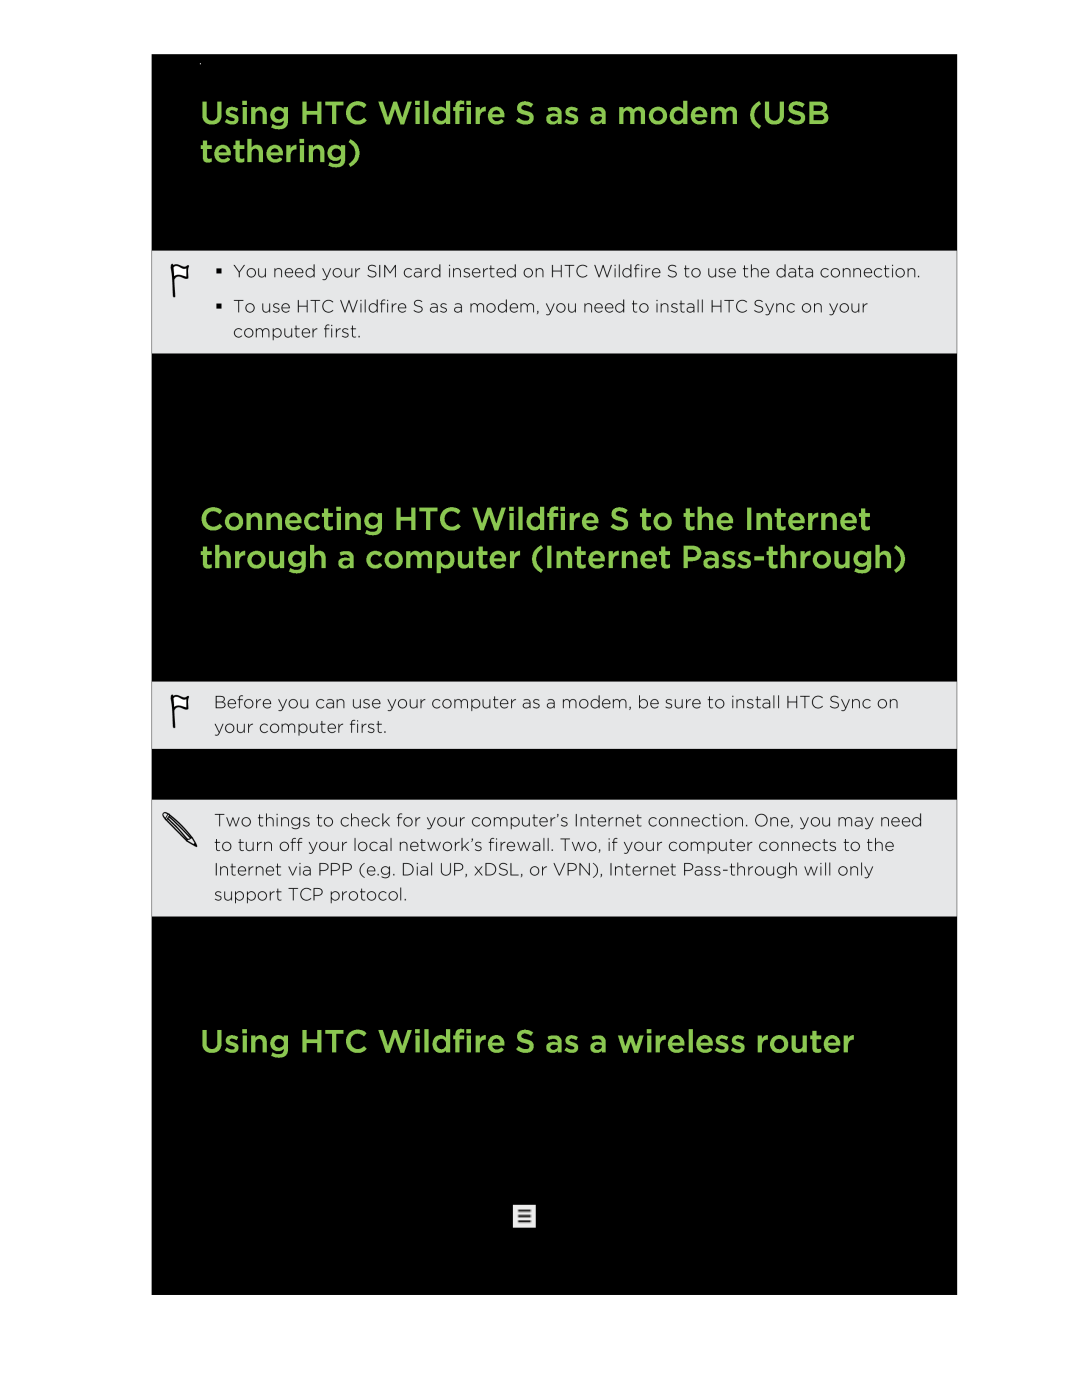 HTC Using HTC Wildfire S as a modem USB tethering, Using HTC Wildfire S as a wireless router, Internet connections 